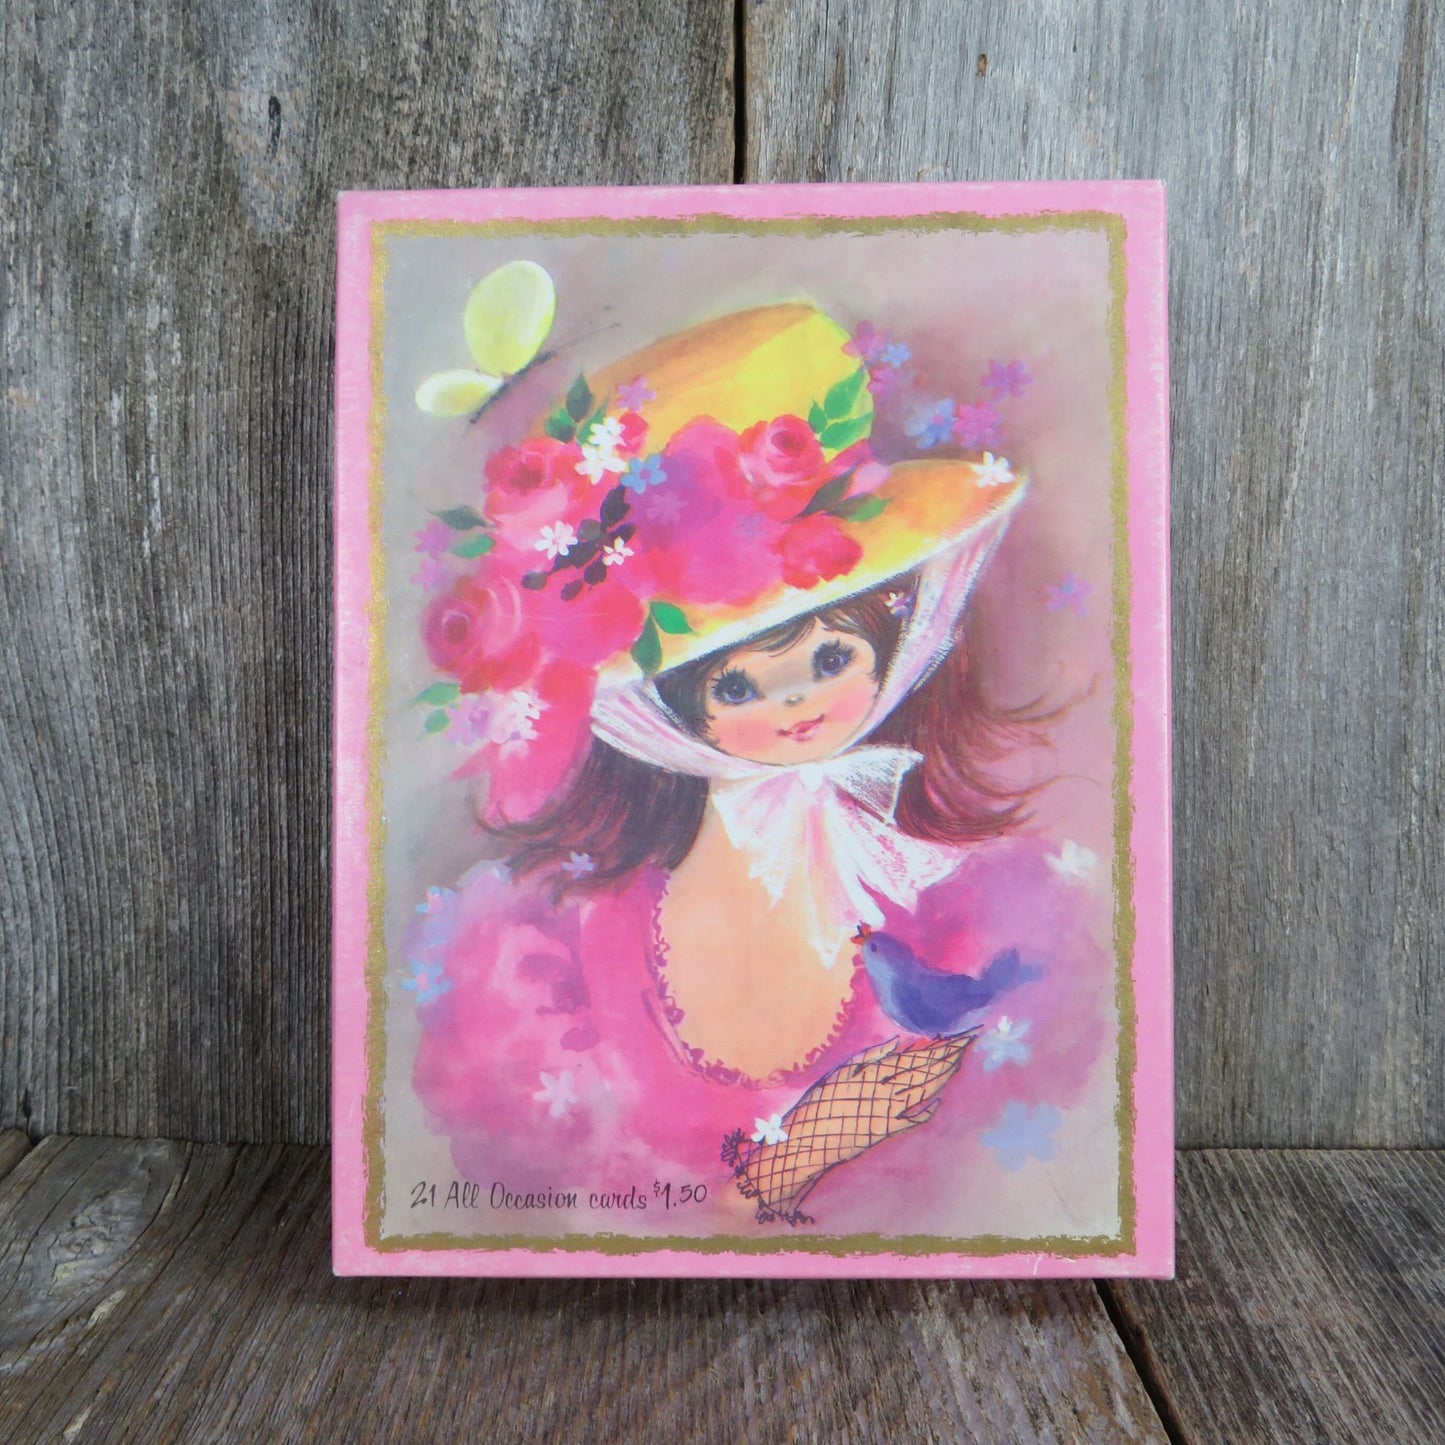 Vintage Caprice Greeting Card Box Girl Flowered Hat Pink Blue Coronation Collection Note Cardboard